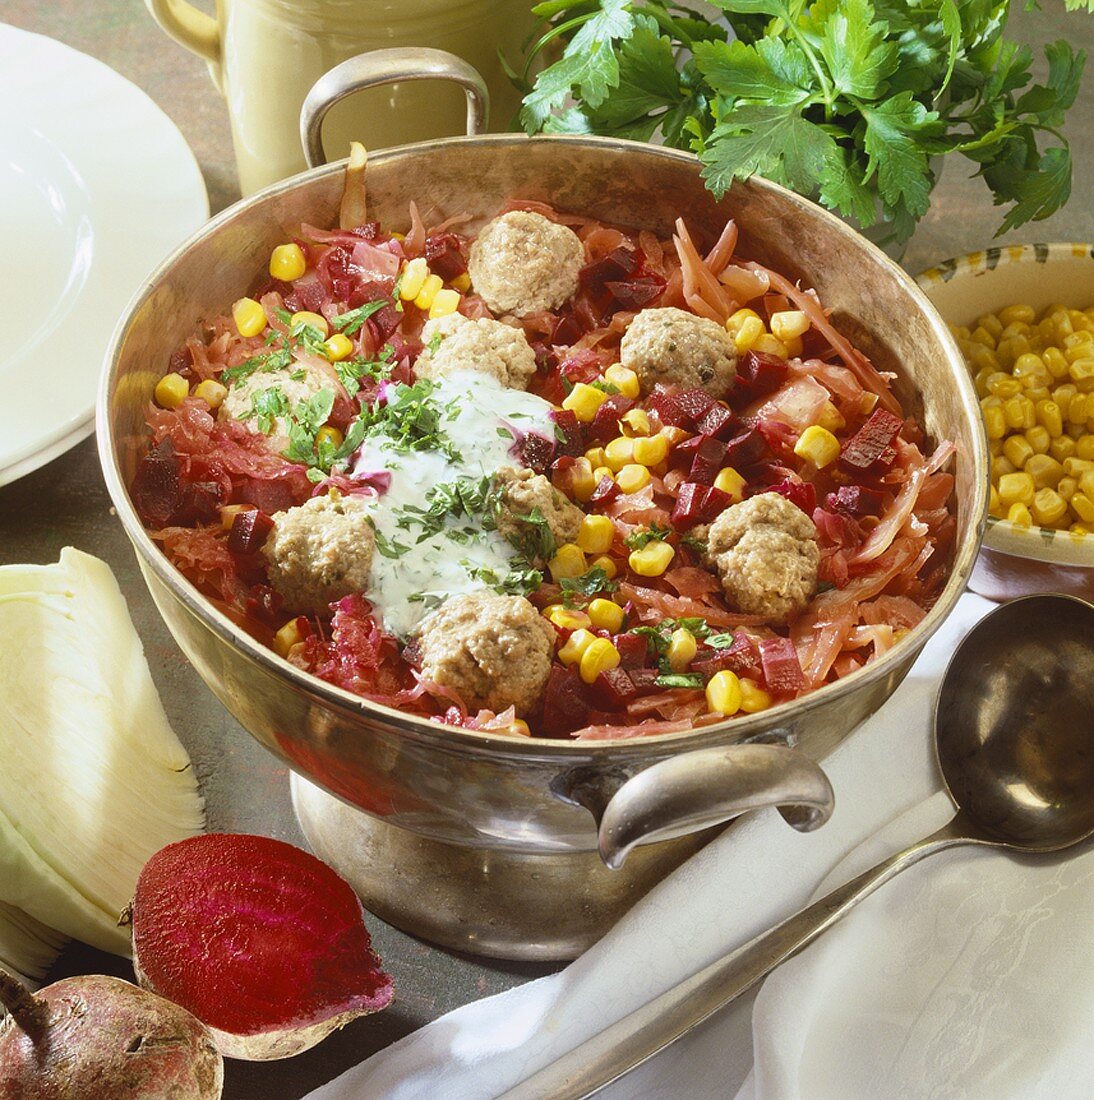 Beetroot stew with sweetcorn and meatballs